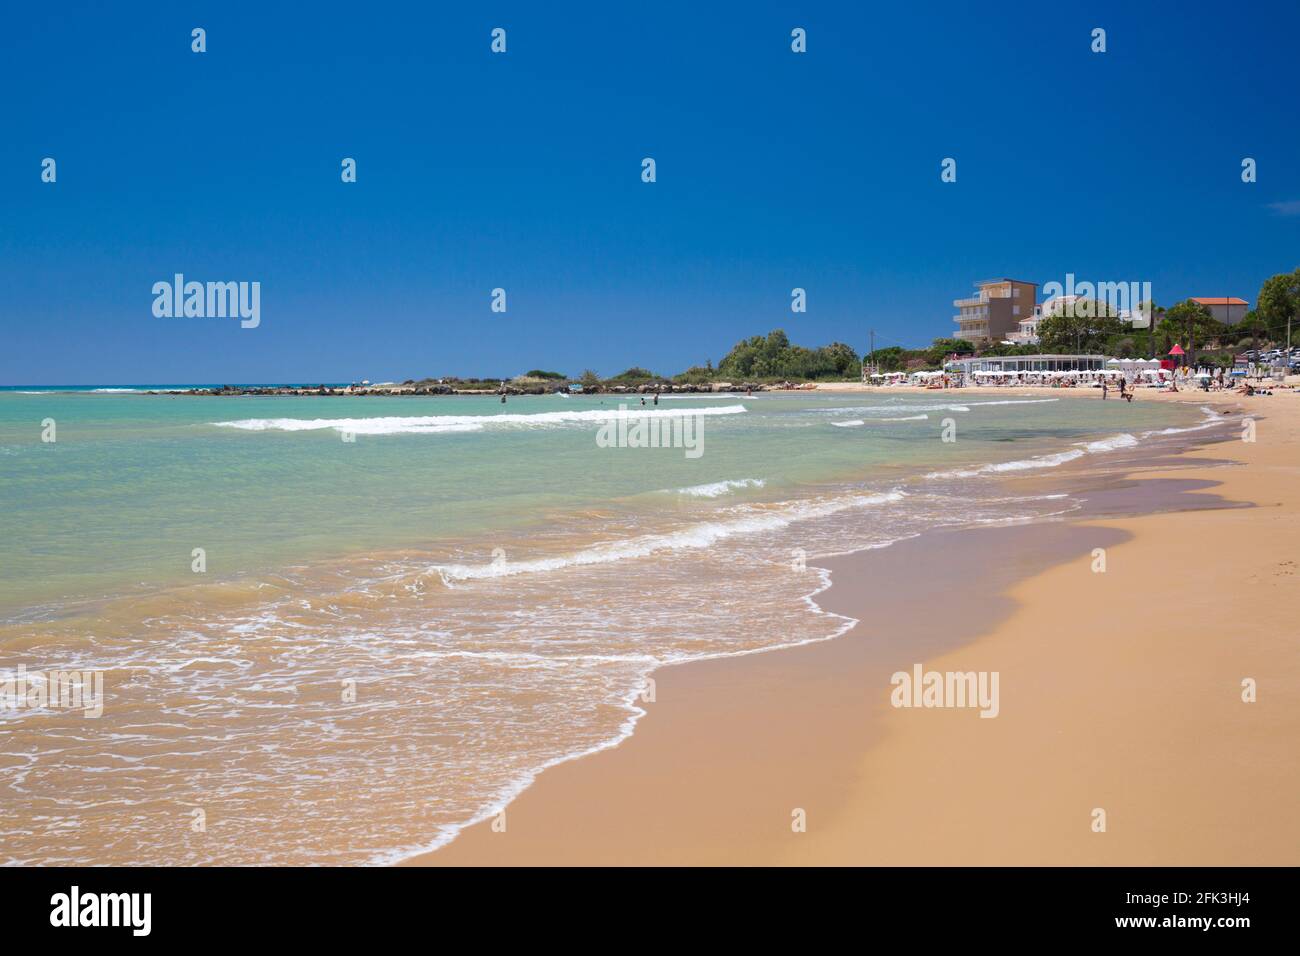 Realmonte, Agrigento, Sicily, Italy. View across bay from sandy beach, gentle waves lapping shore. Stock Photo